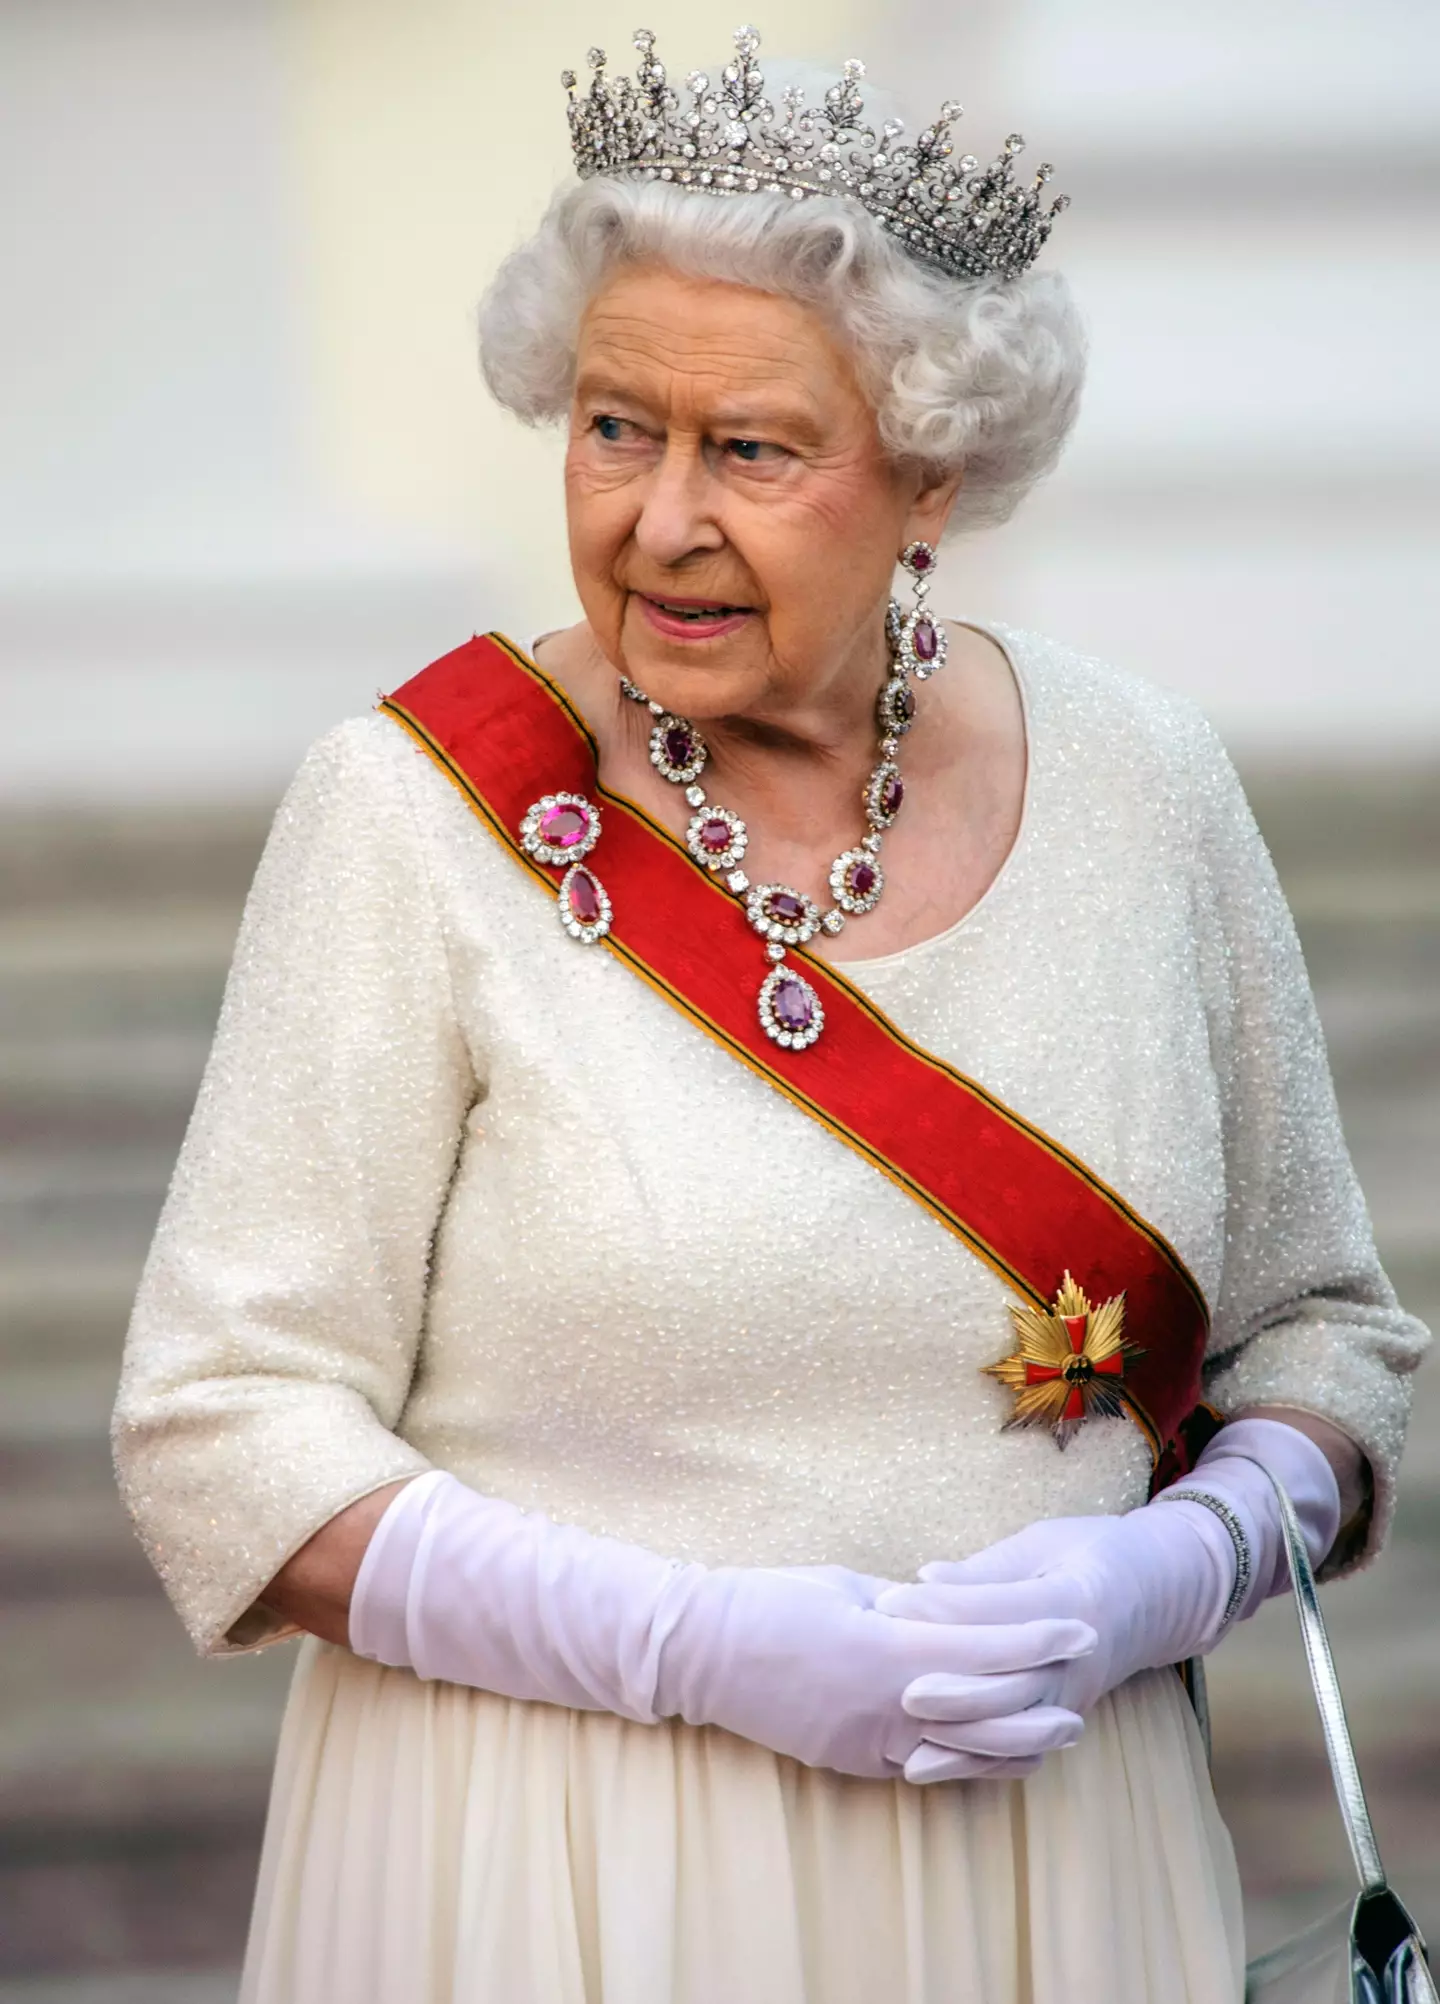 News of Her Majesty's passing was confirmed by Buckingham Palace.